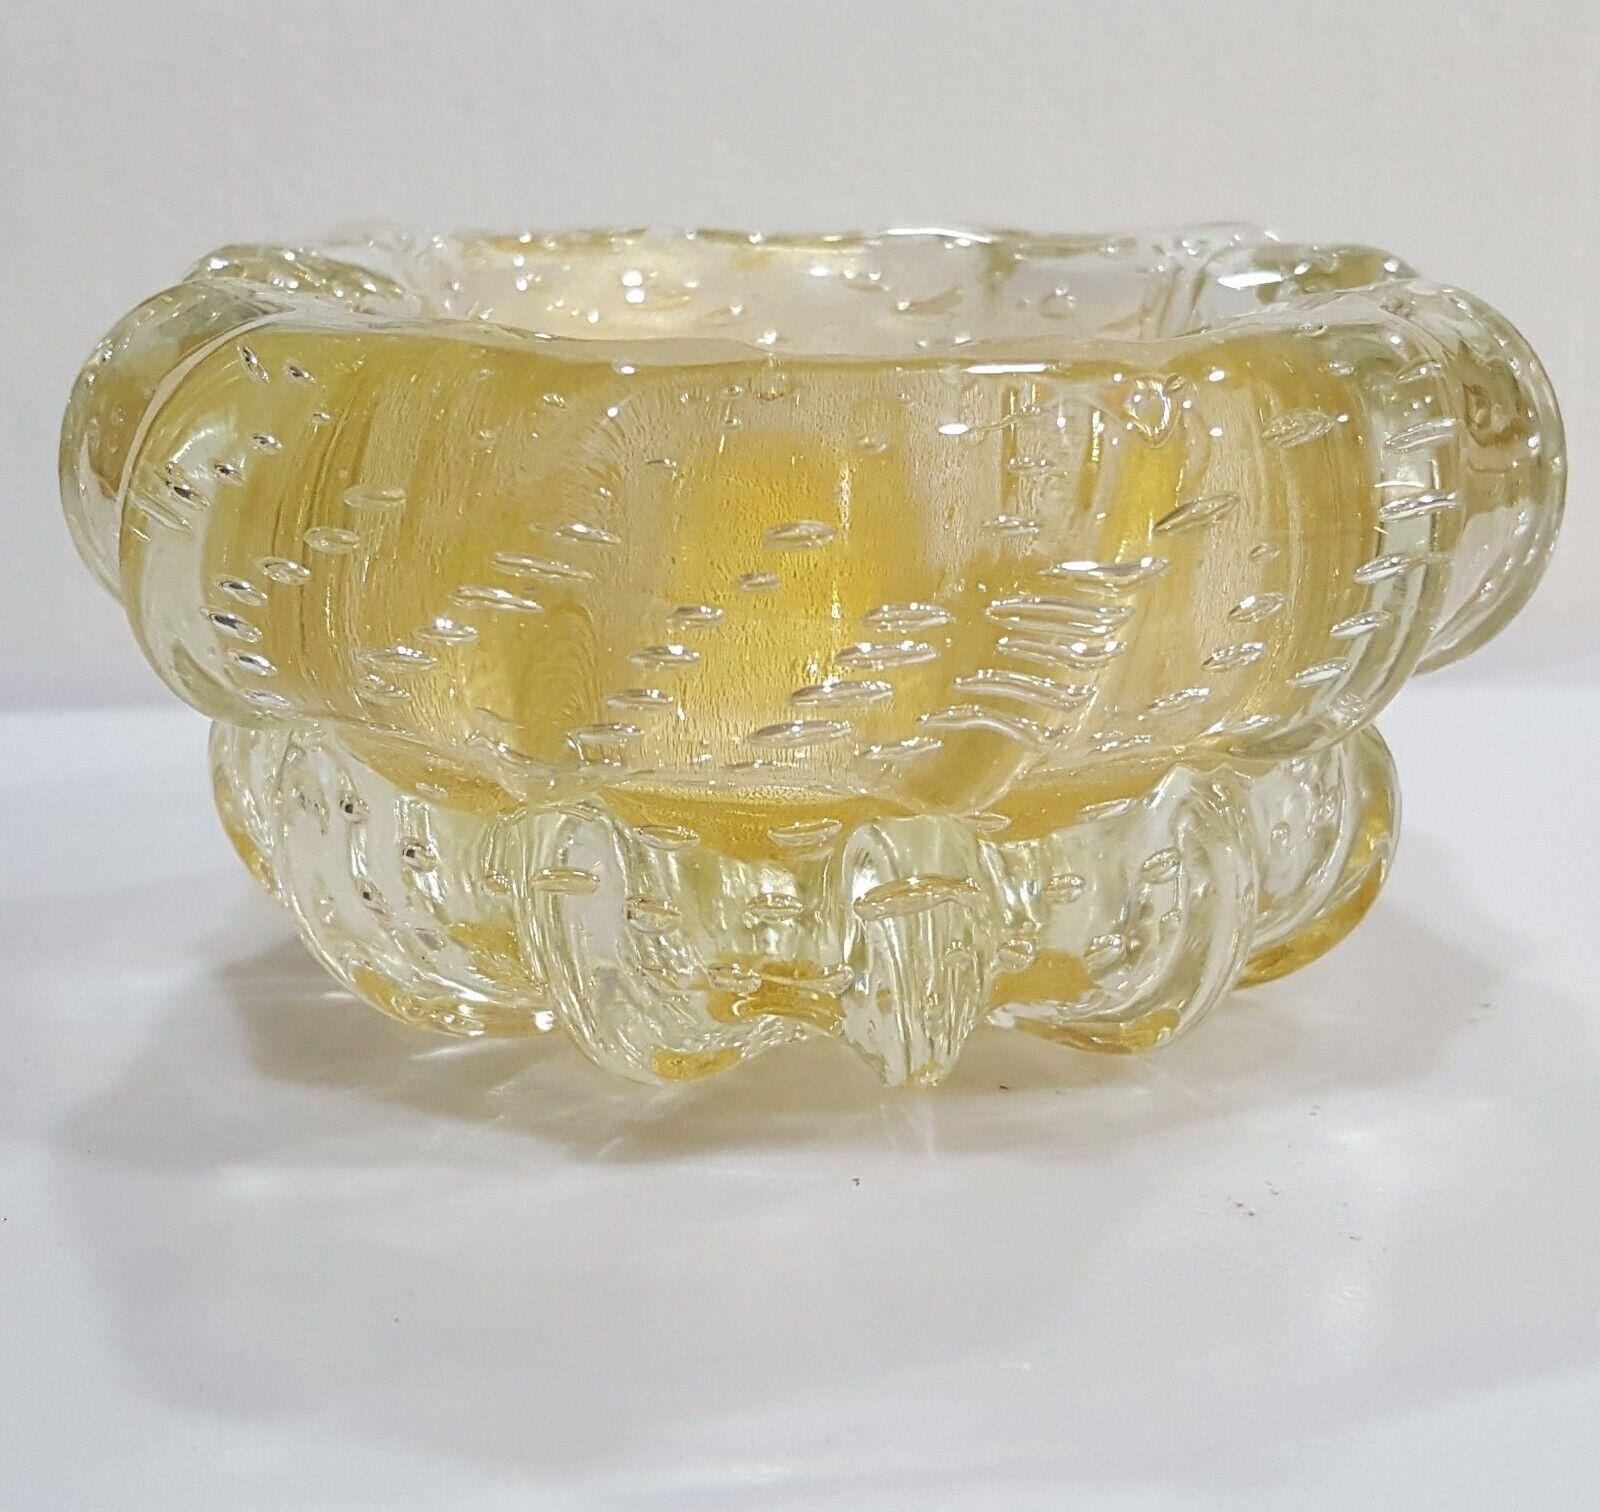 Murano Glass Barovier & Toso Gold Polveri & Bullicante Vintage Bowl/Ashtray/Dish. We found no chips or cracks. 
The base shows some wear (scratching and dulling). There are some small raised areas inside that can be felt -- probably a result of the